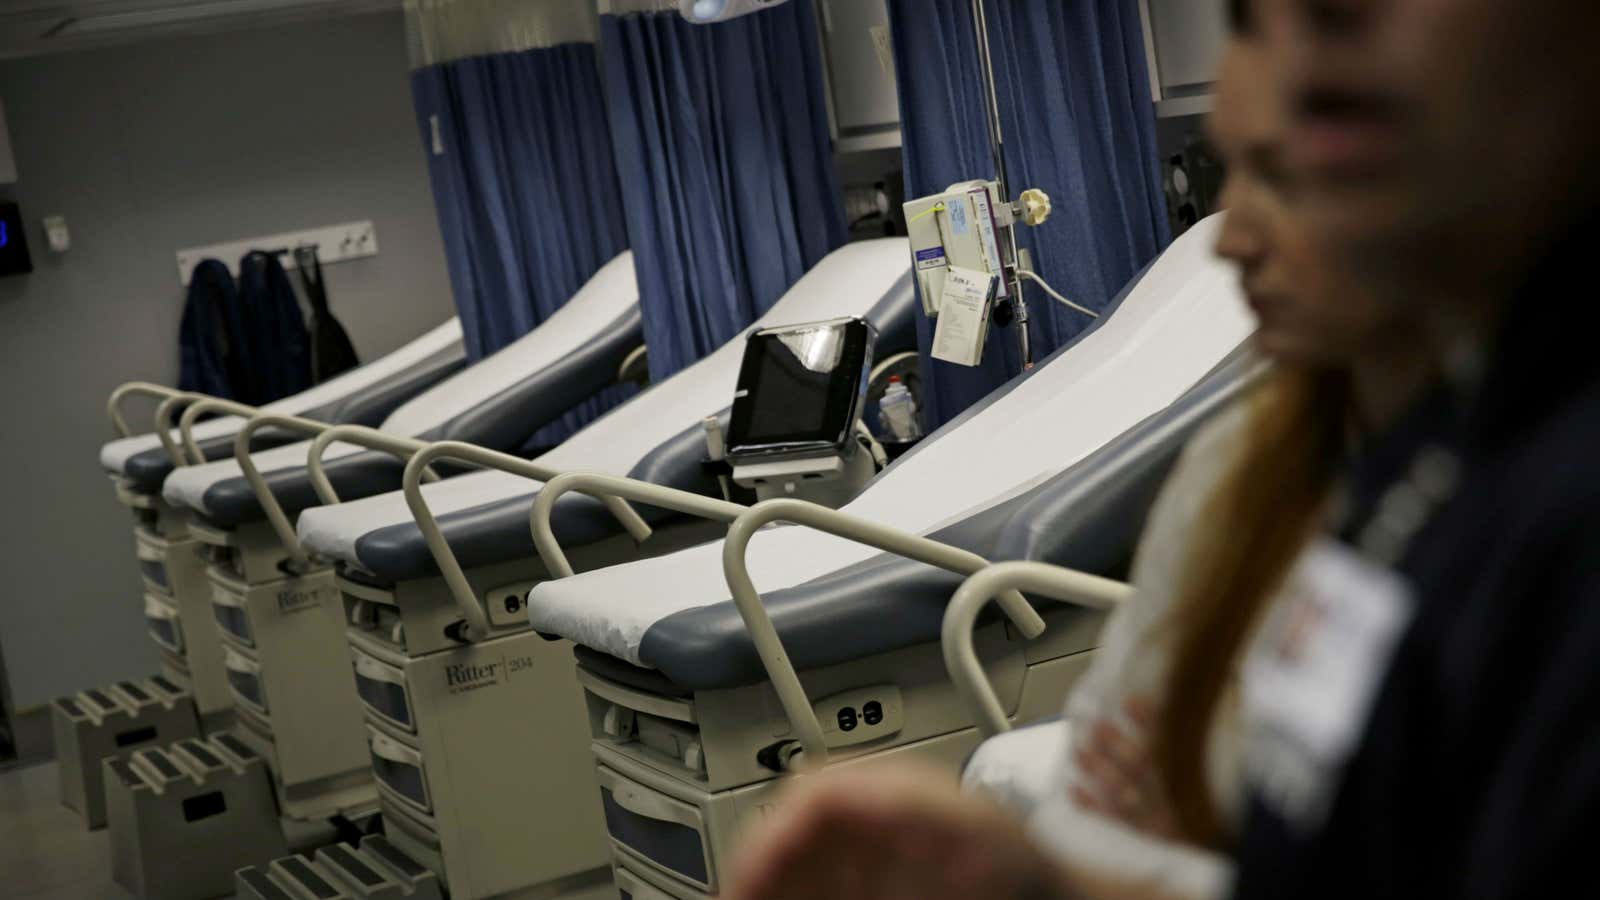 Hospitals have seen an uptick in visits for flu-like symptoms.